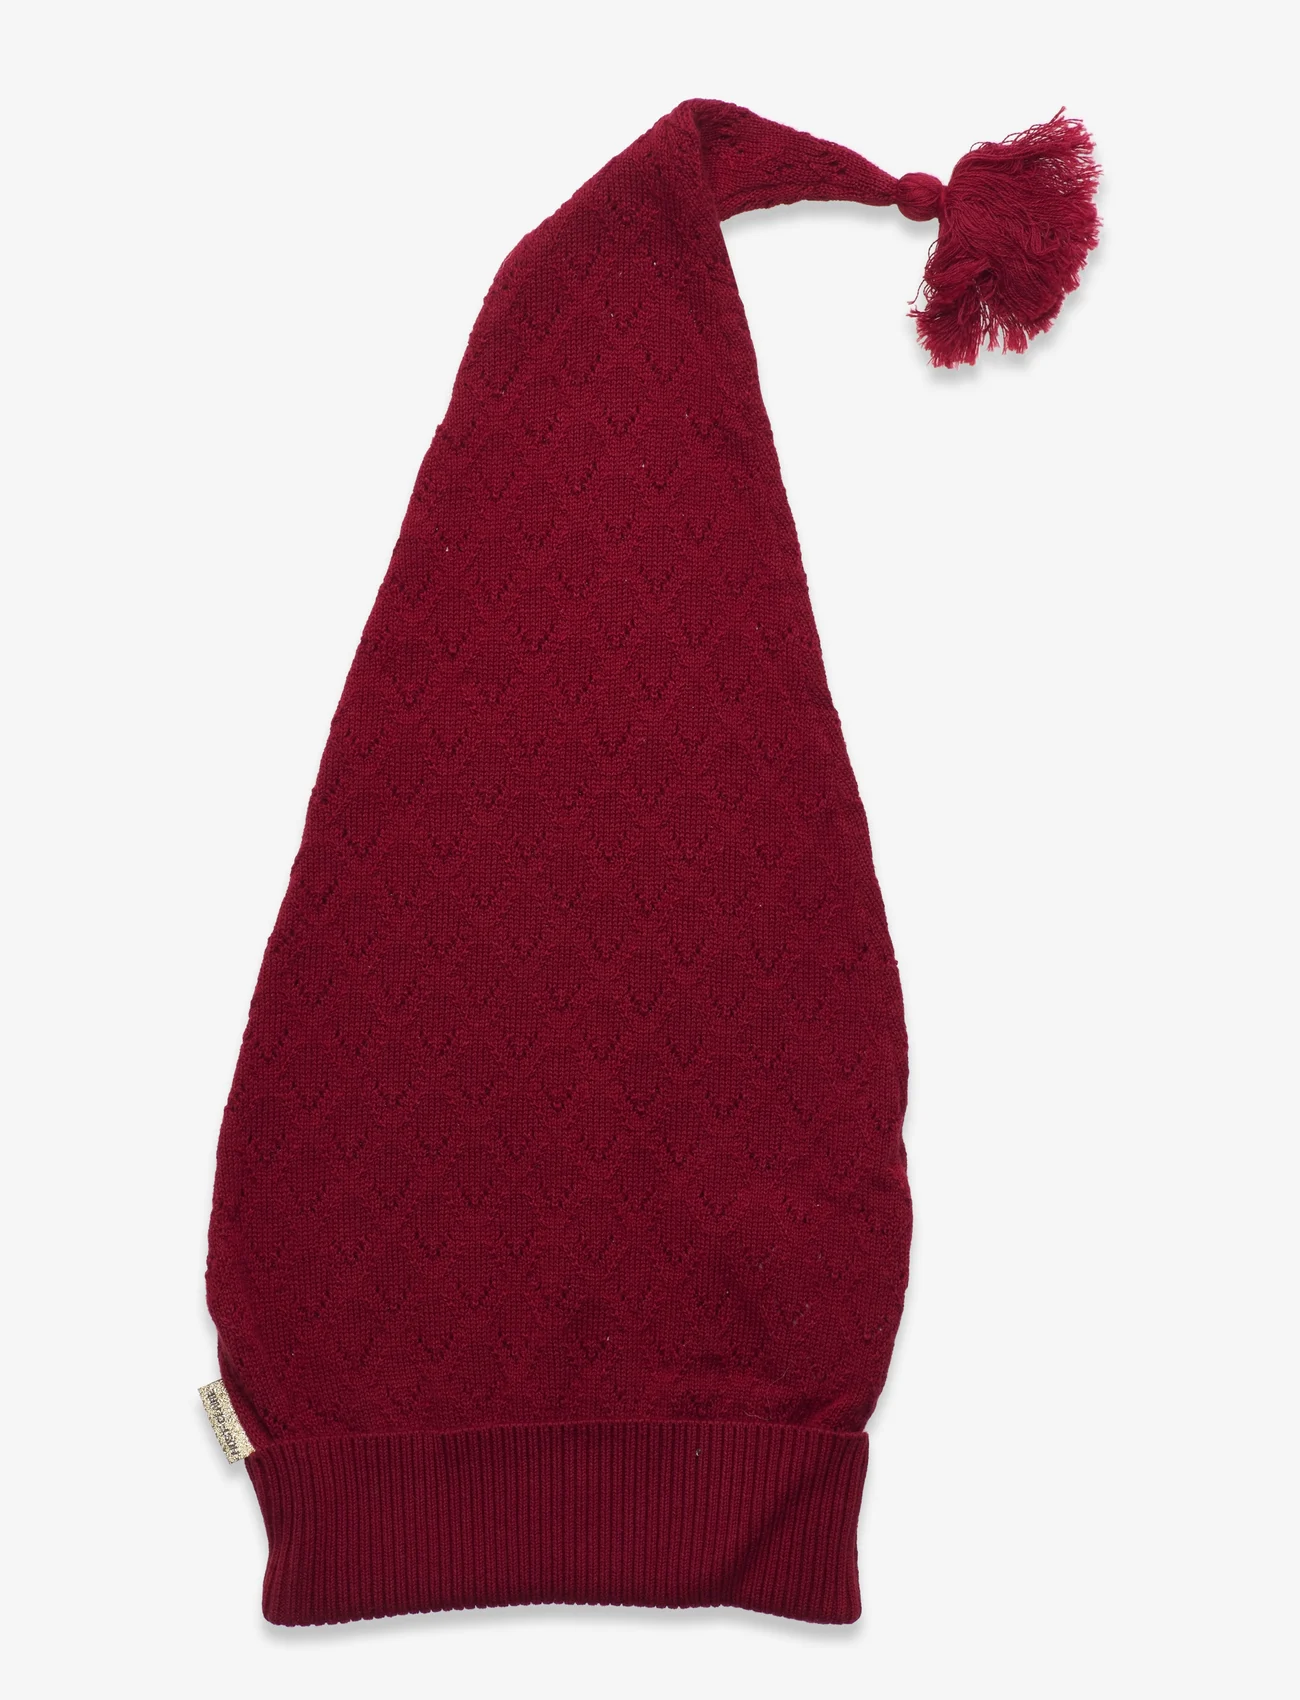 Hust & Claire - Fifi - Christmas hat - kostymetilbehør - teaberry - 1